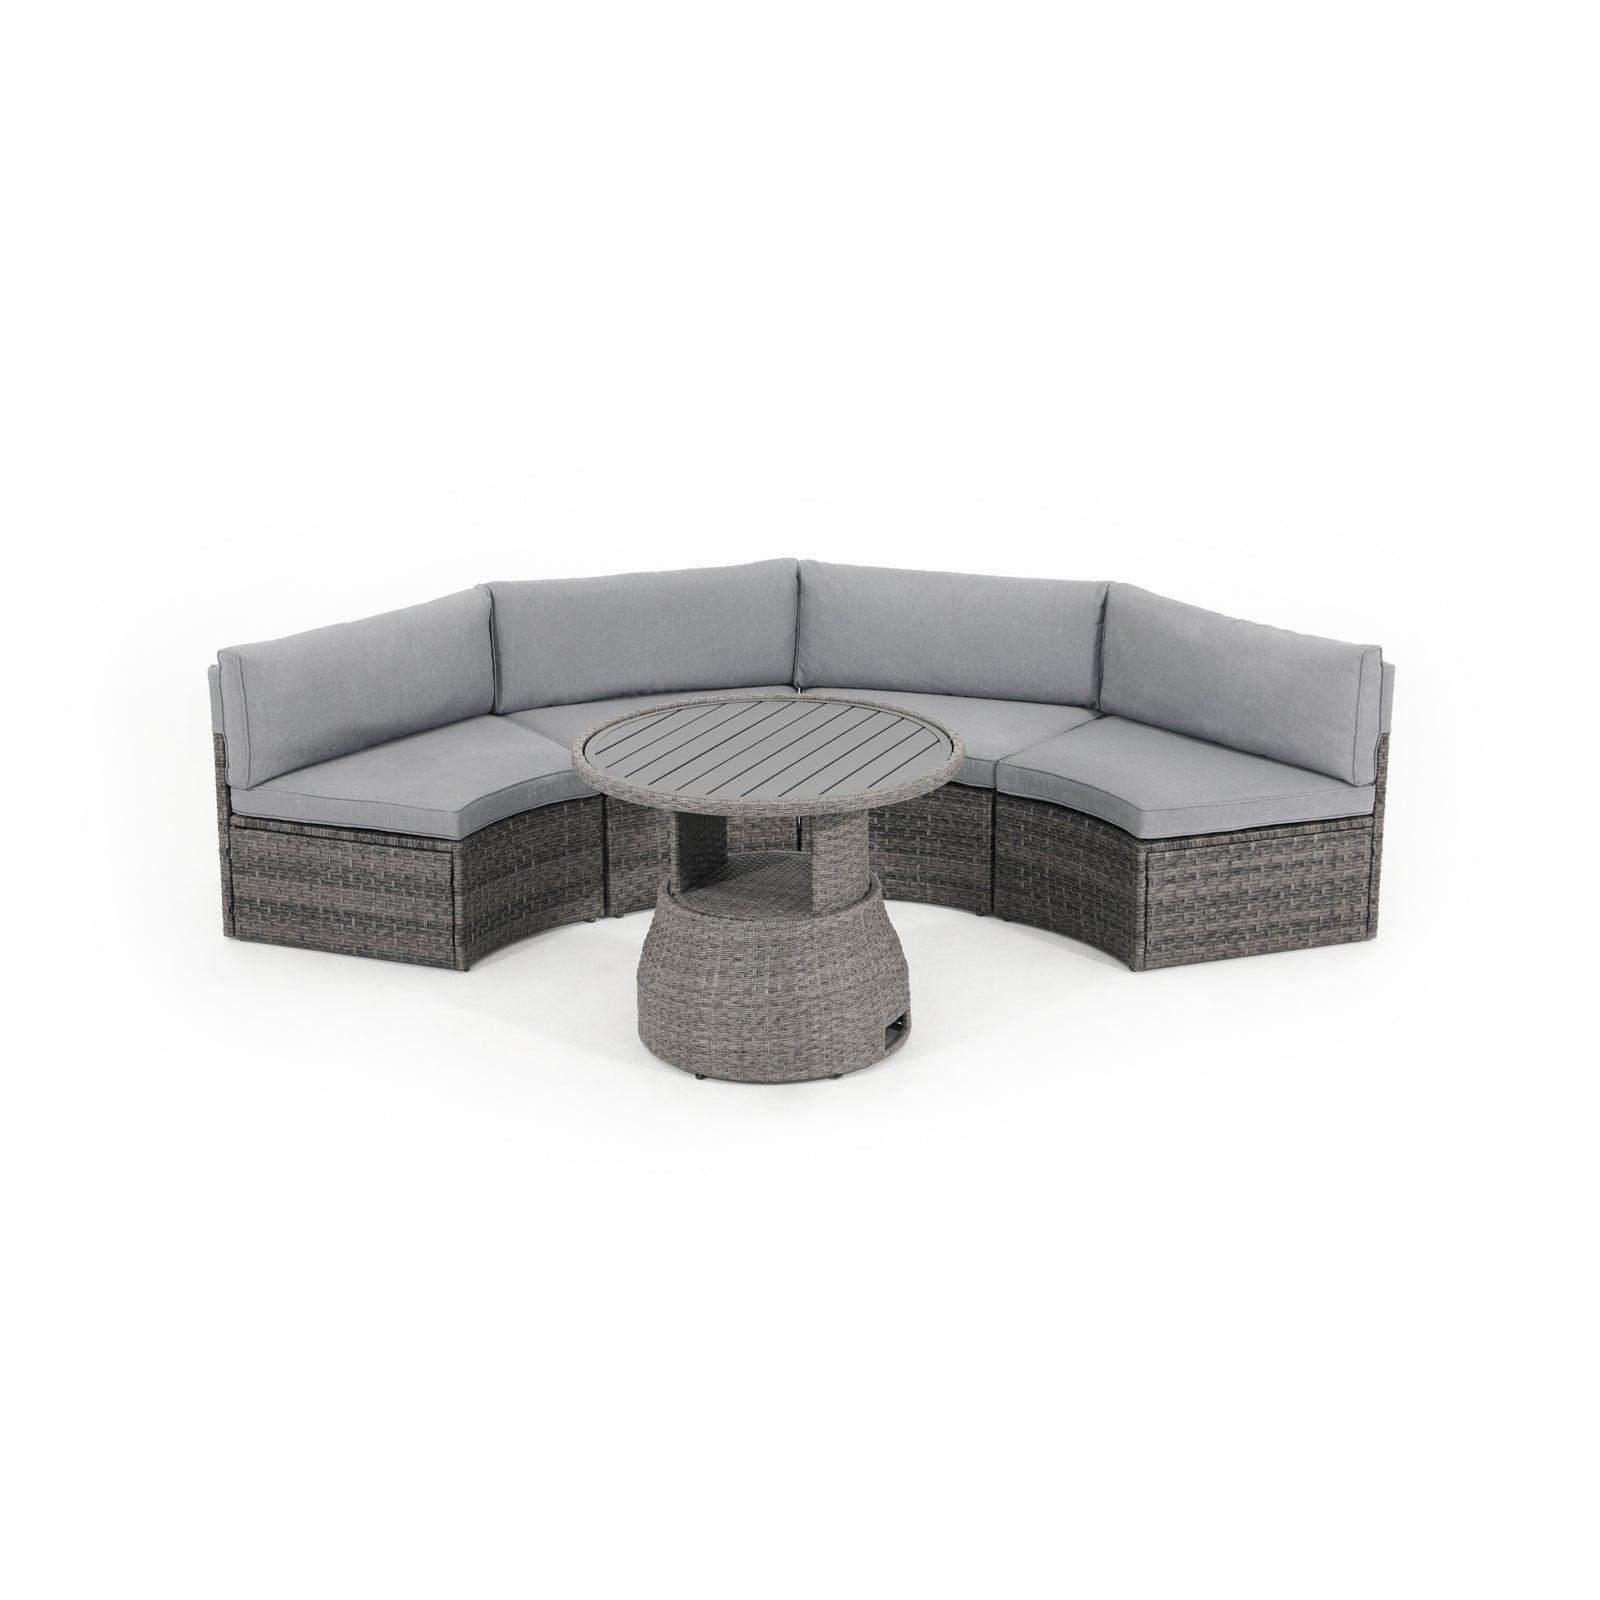 Boboli Modern Wicker Outdoor Furniture, 4-seater Grey Outdoor Wicker Curved Sectional sofas with grey cushions + 1 Lift-top round table, front view - Jardina Furniture#color_Grey#piece_5-pc.